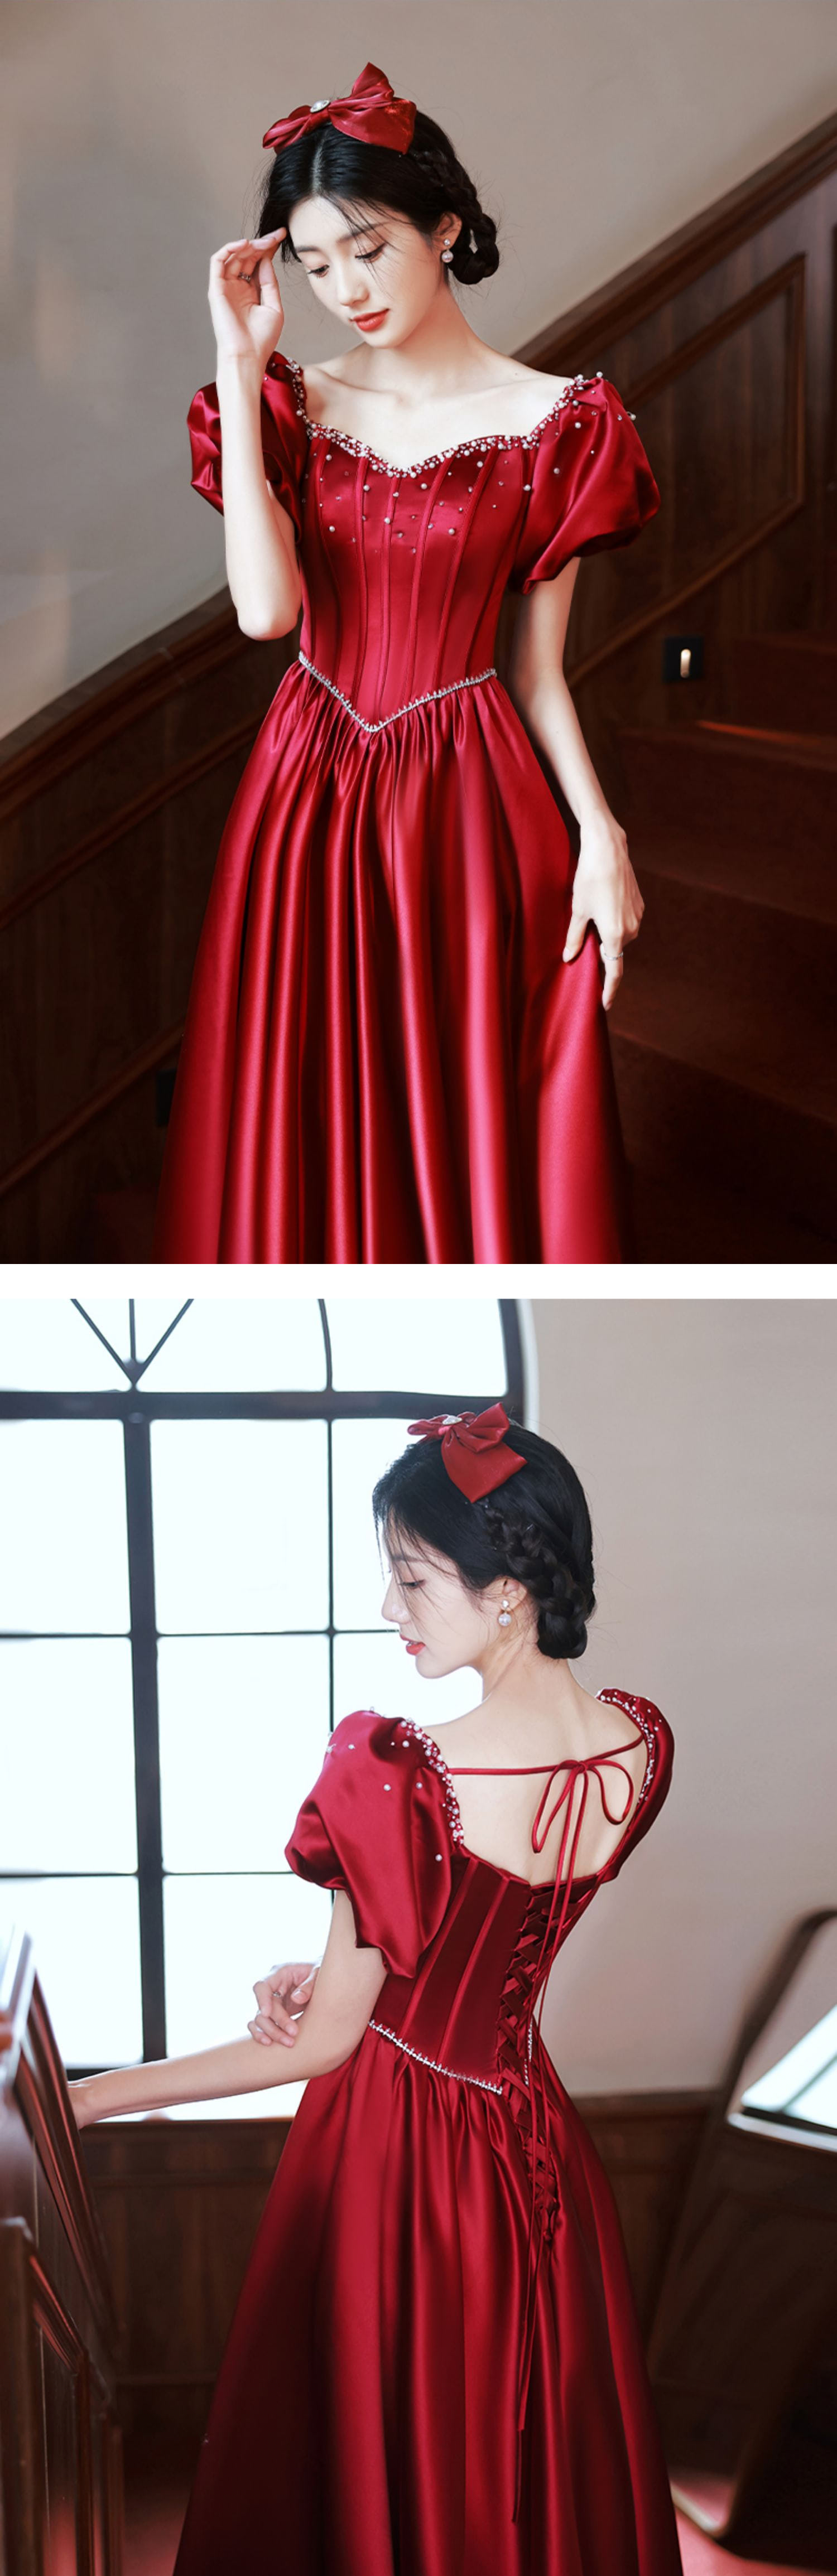 A-Line-Classy-Satin-Cocktail-Formal-Prom-Long-Dress-with-Sleeves12